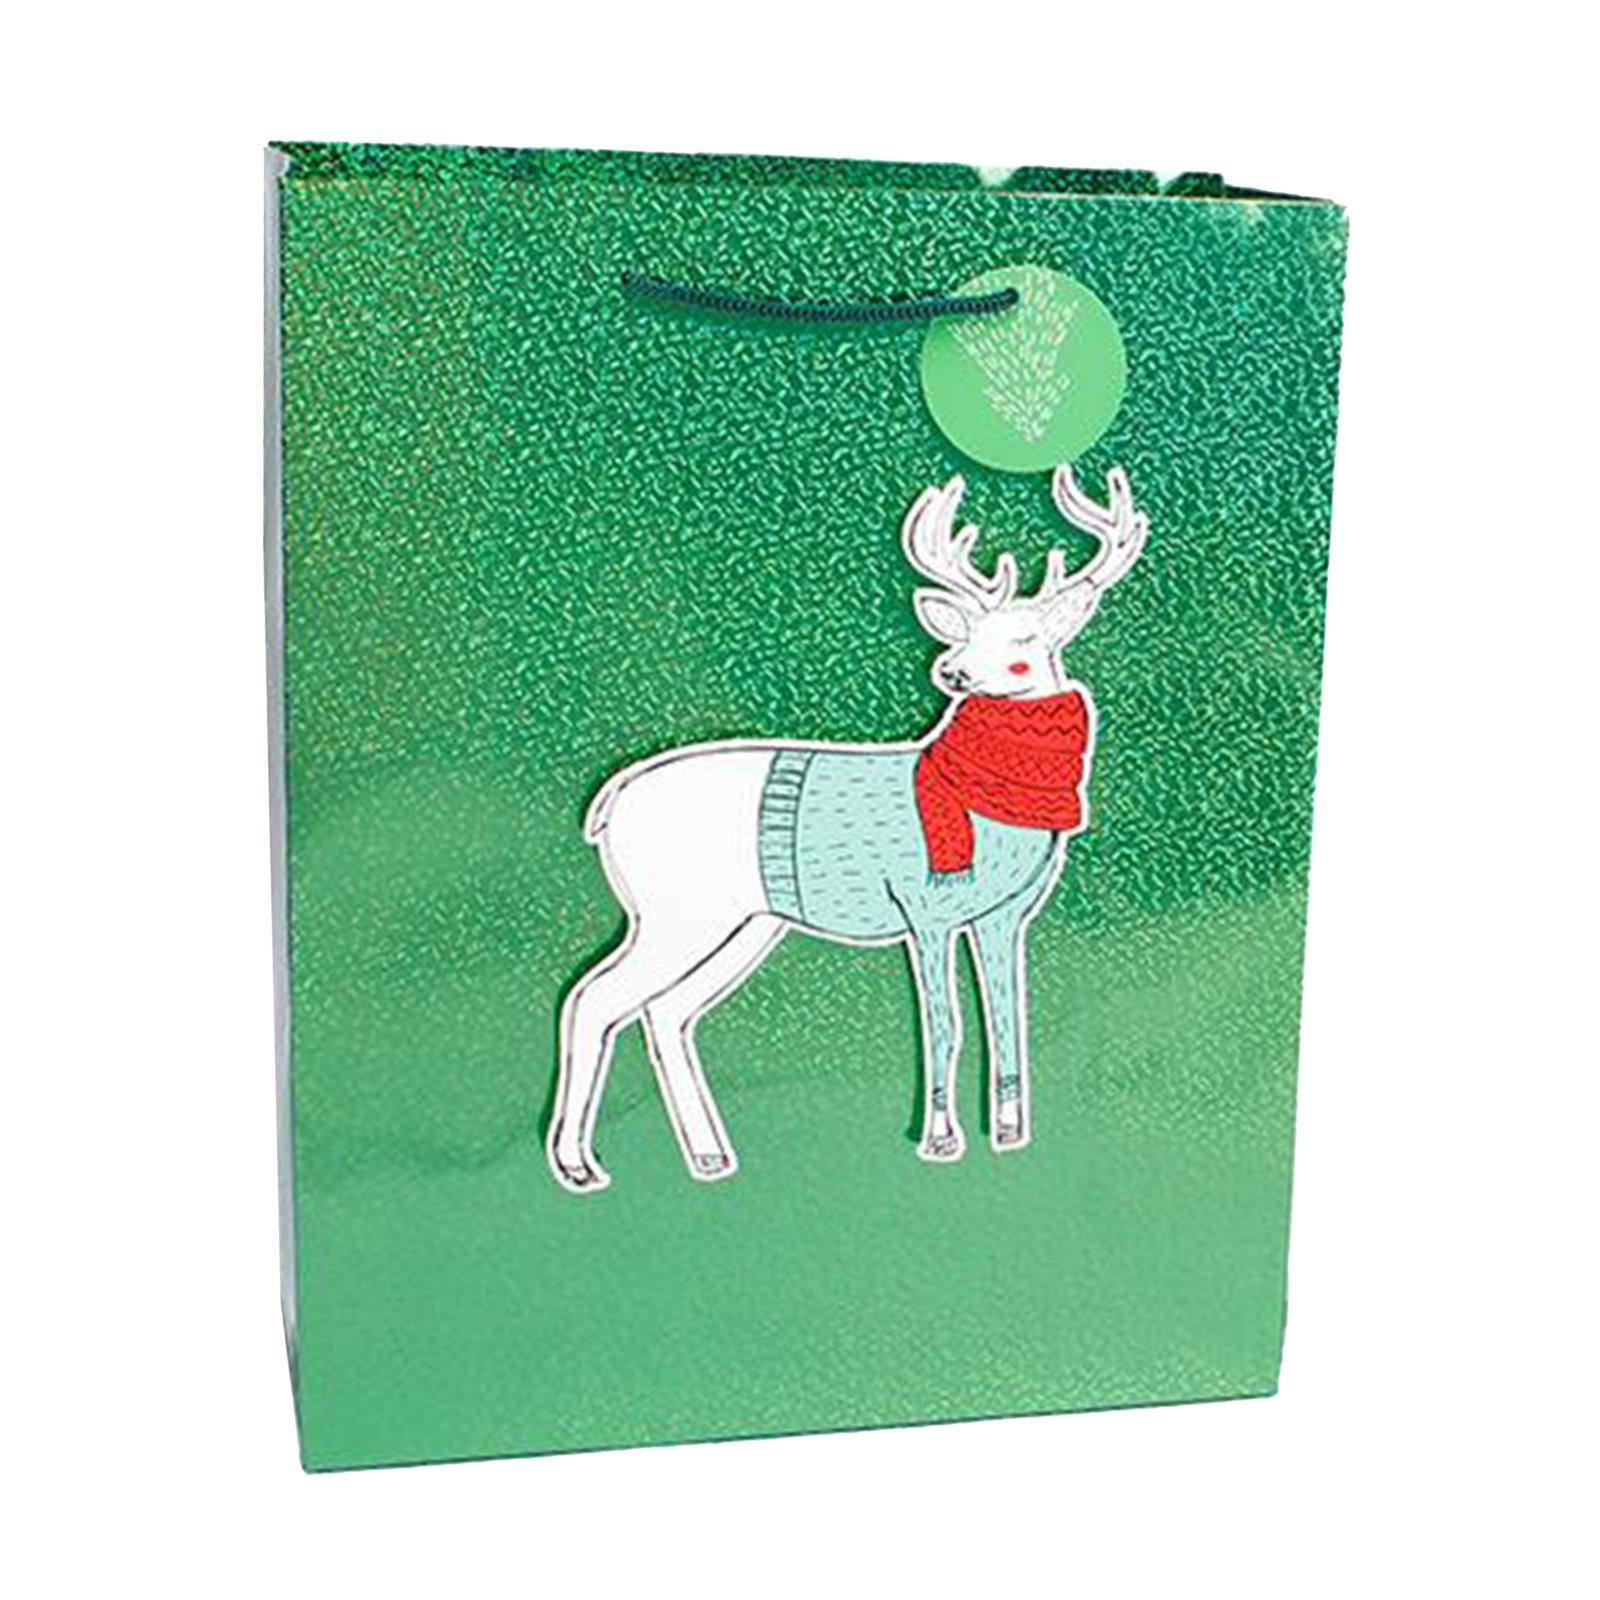 Medium Gift Bags Wrapping Present Party Bag Xmas Bags Squirrel